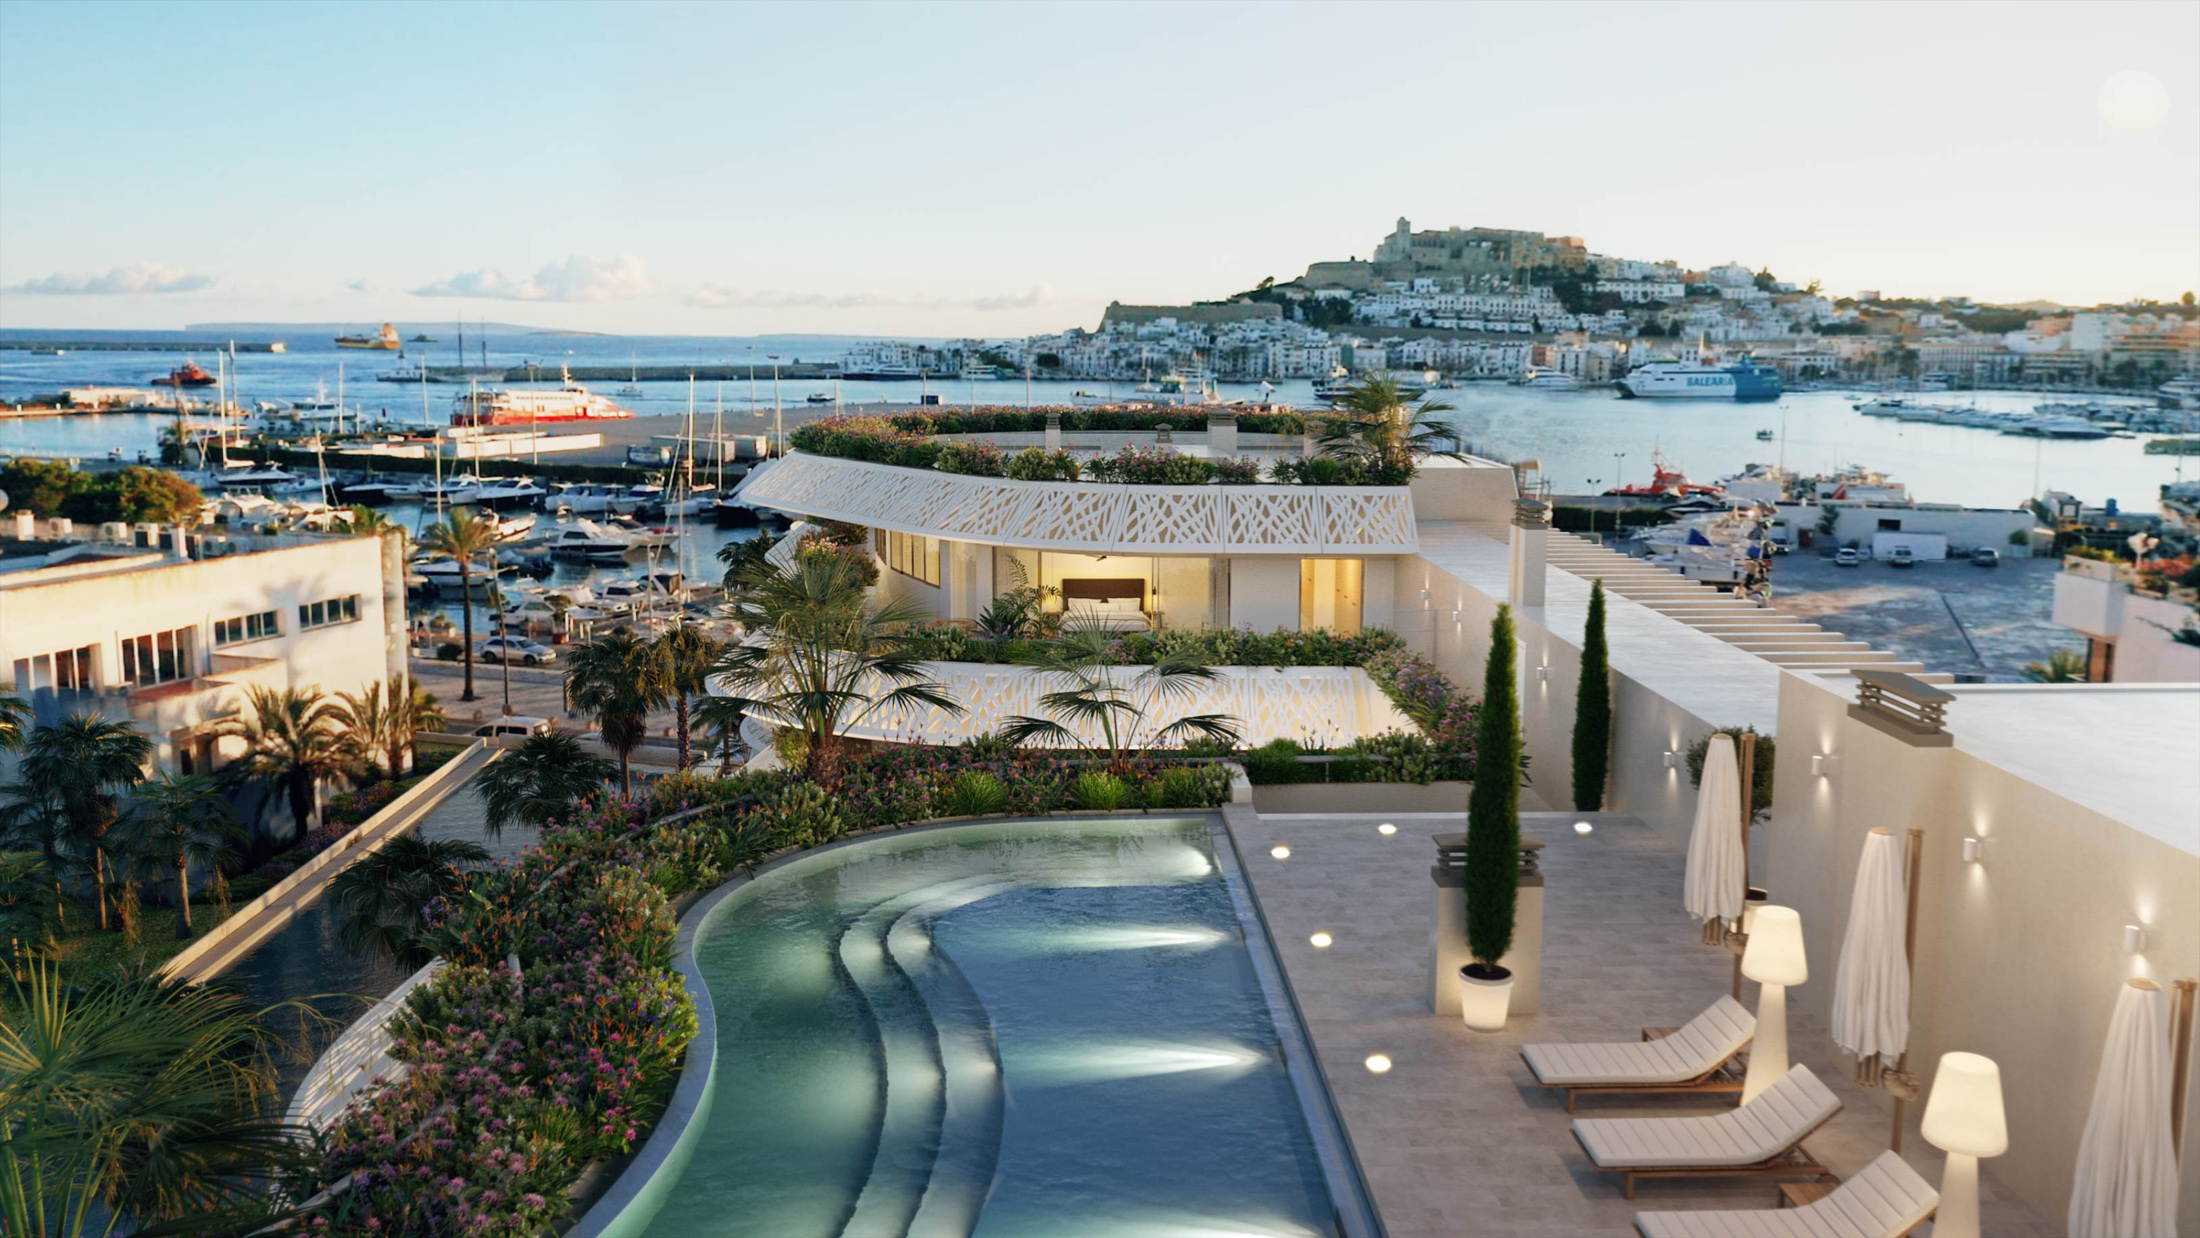 Render showing the pool of a luxury apartment complex in Marina Botafoch, Ibiza